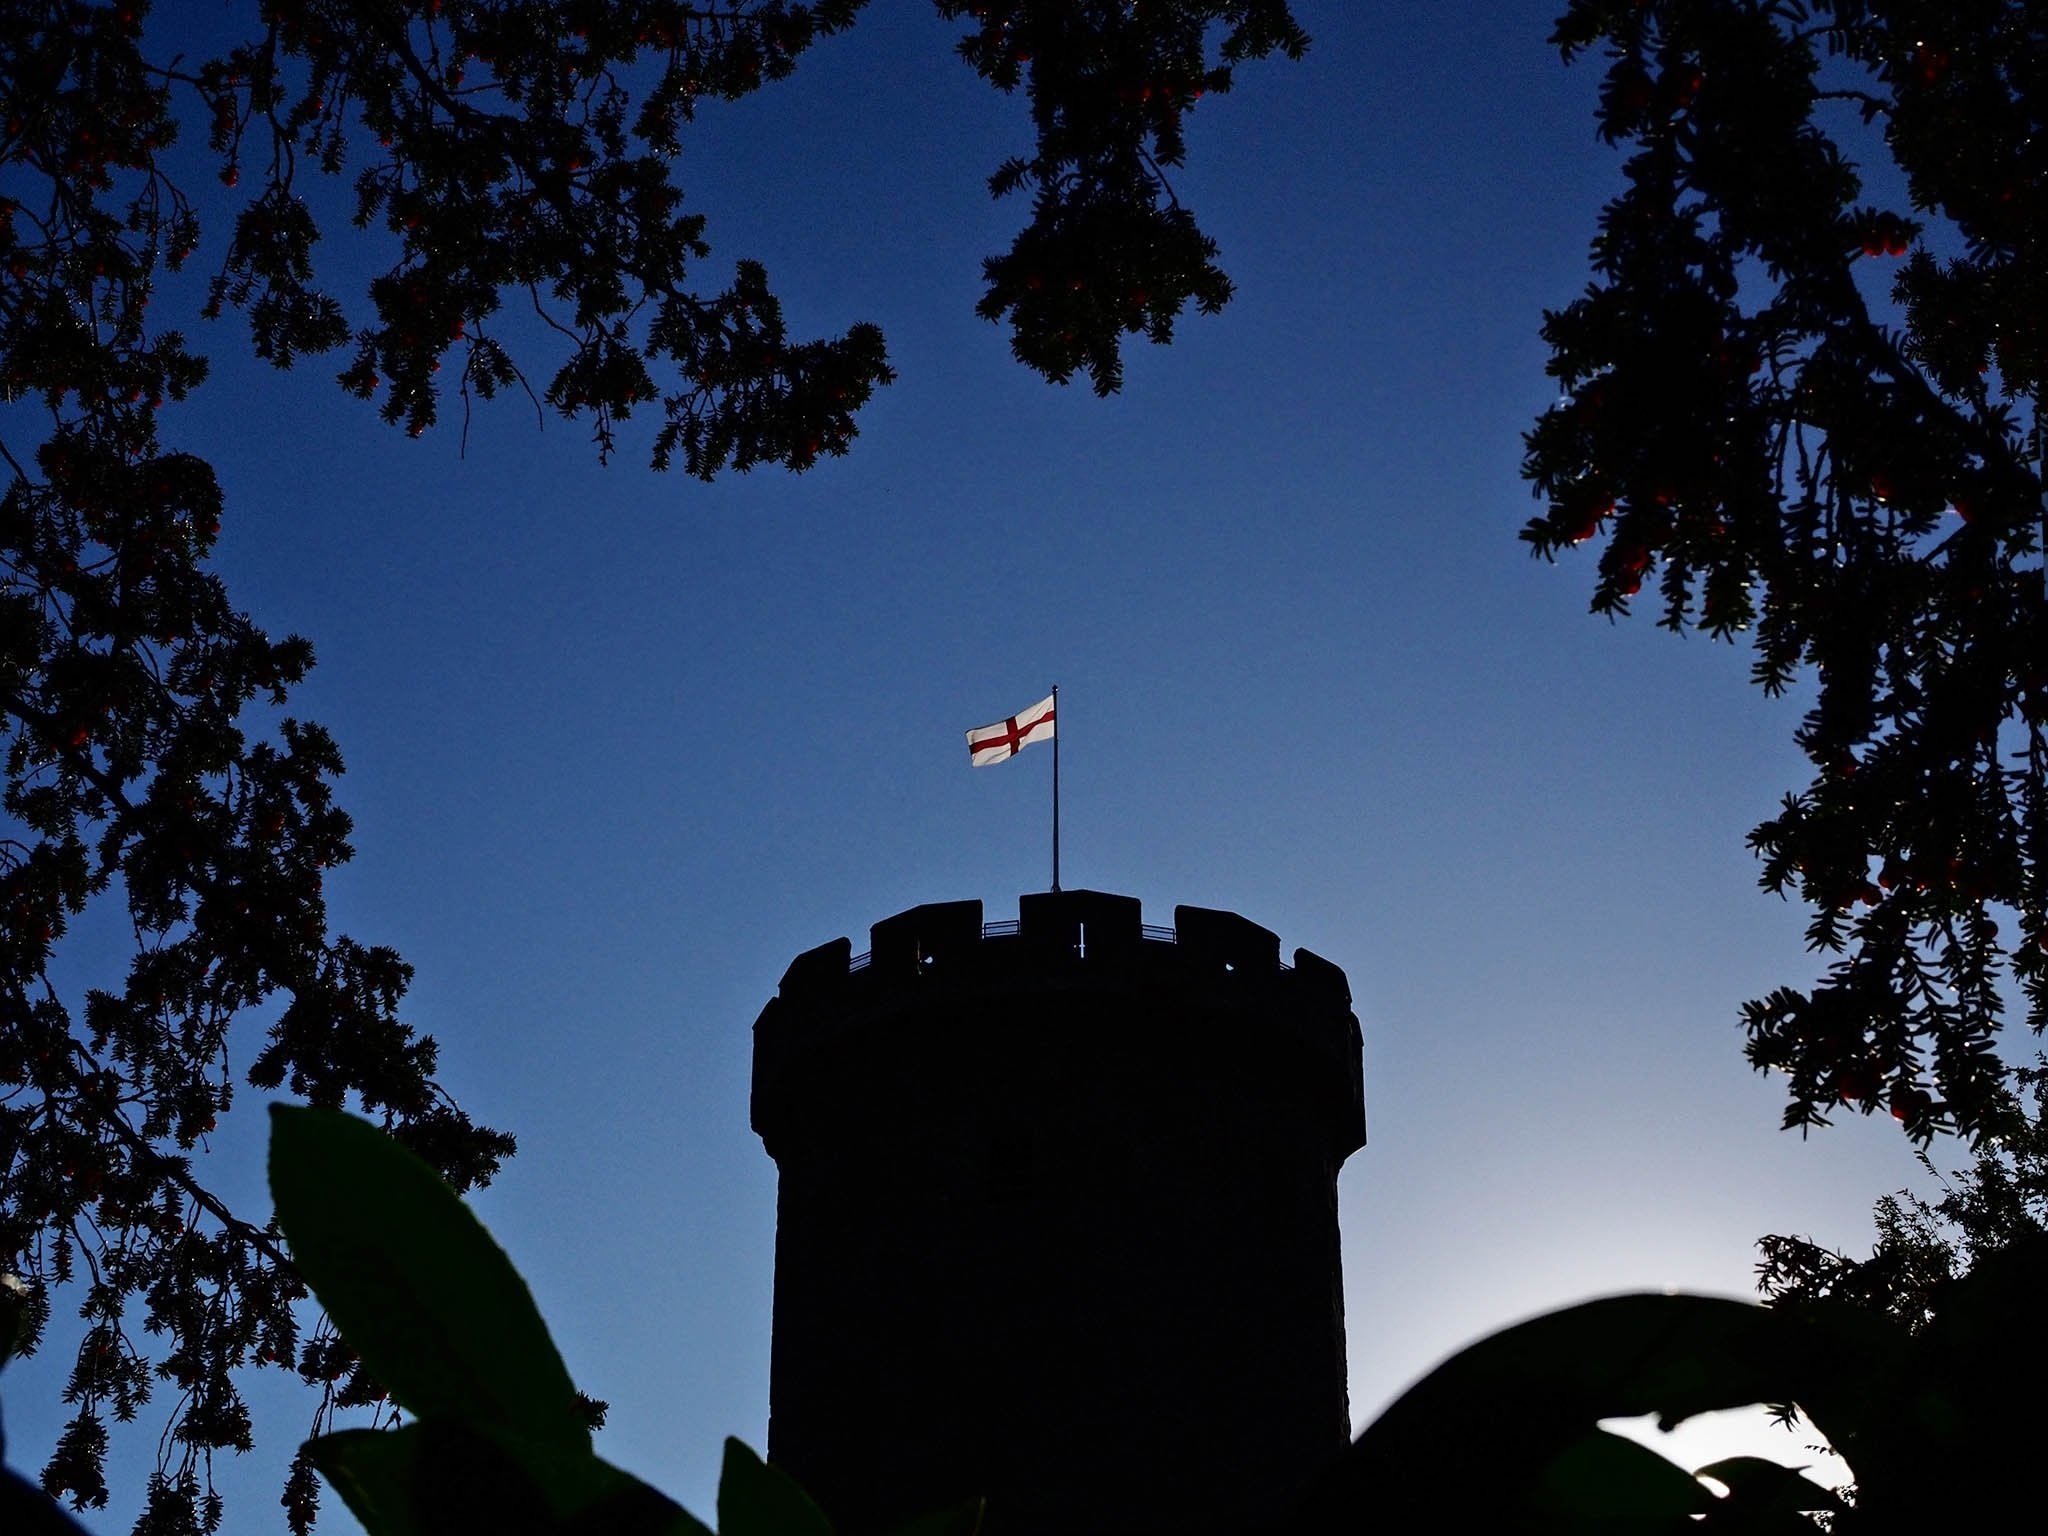 An early morning view of Warwick Castle, still black, just reappearing, yet the flag shines as if it had done so the whole night through, as if it had always been this way: a beacon of light in a world of darkness